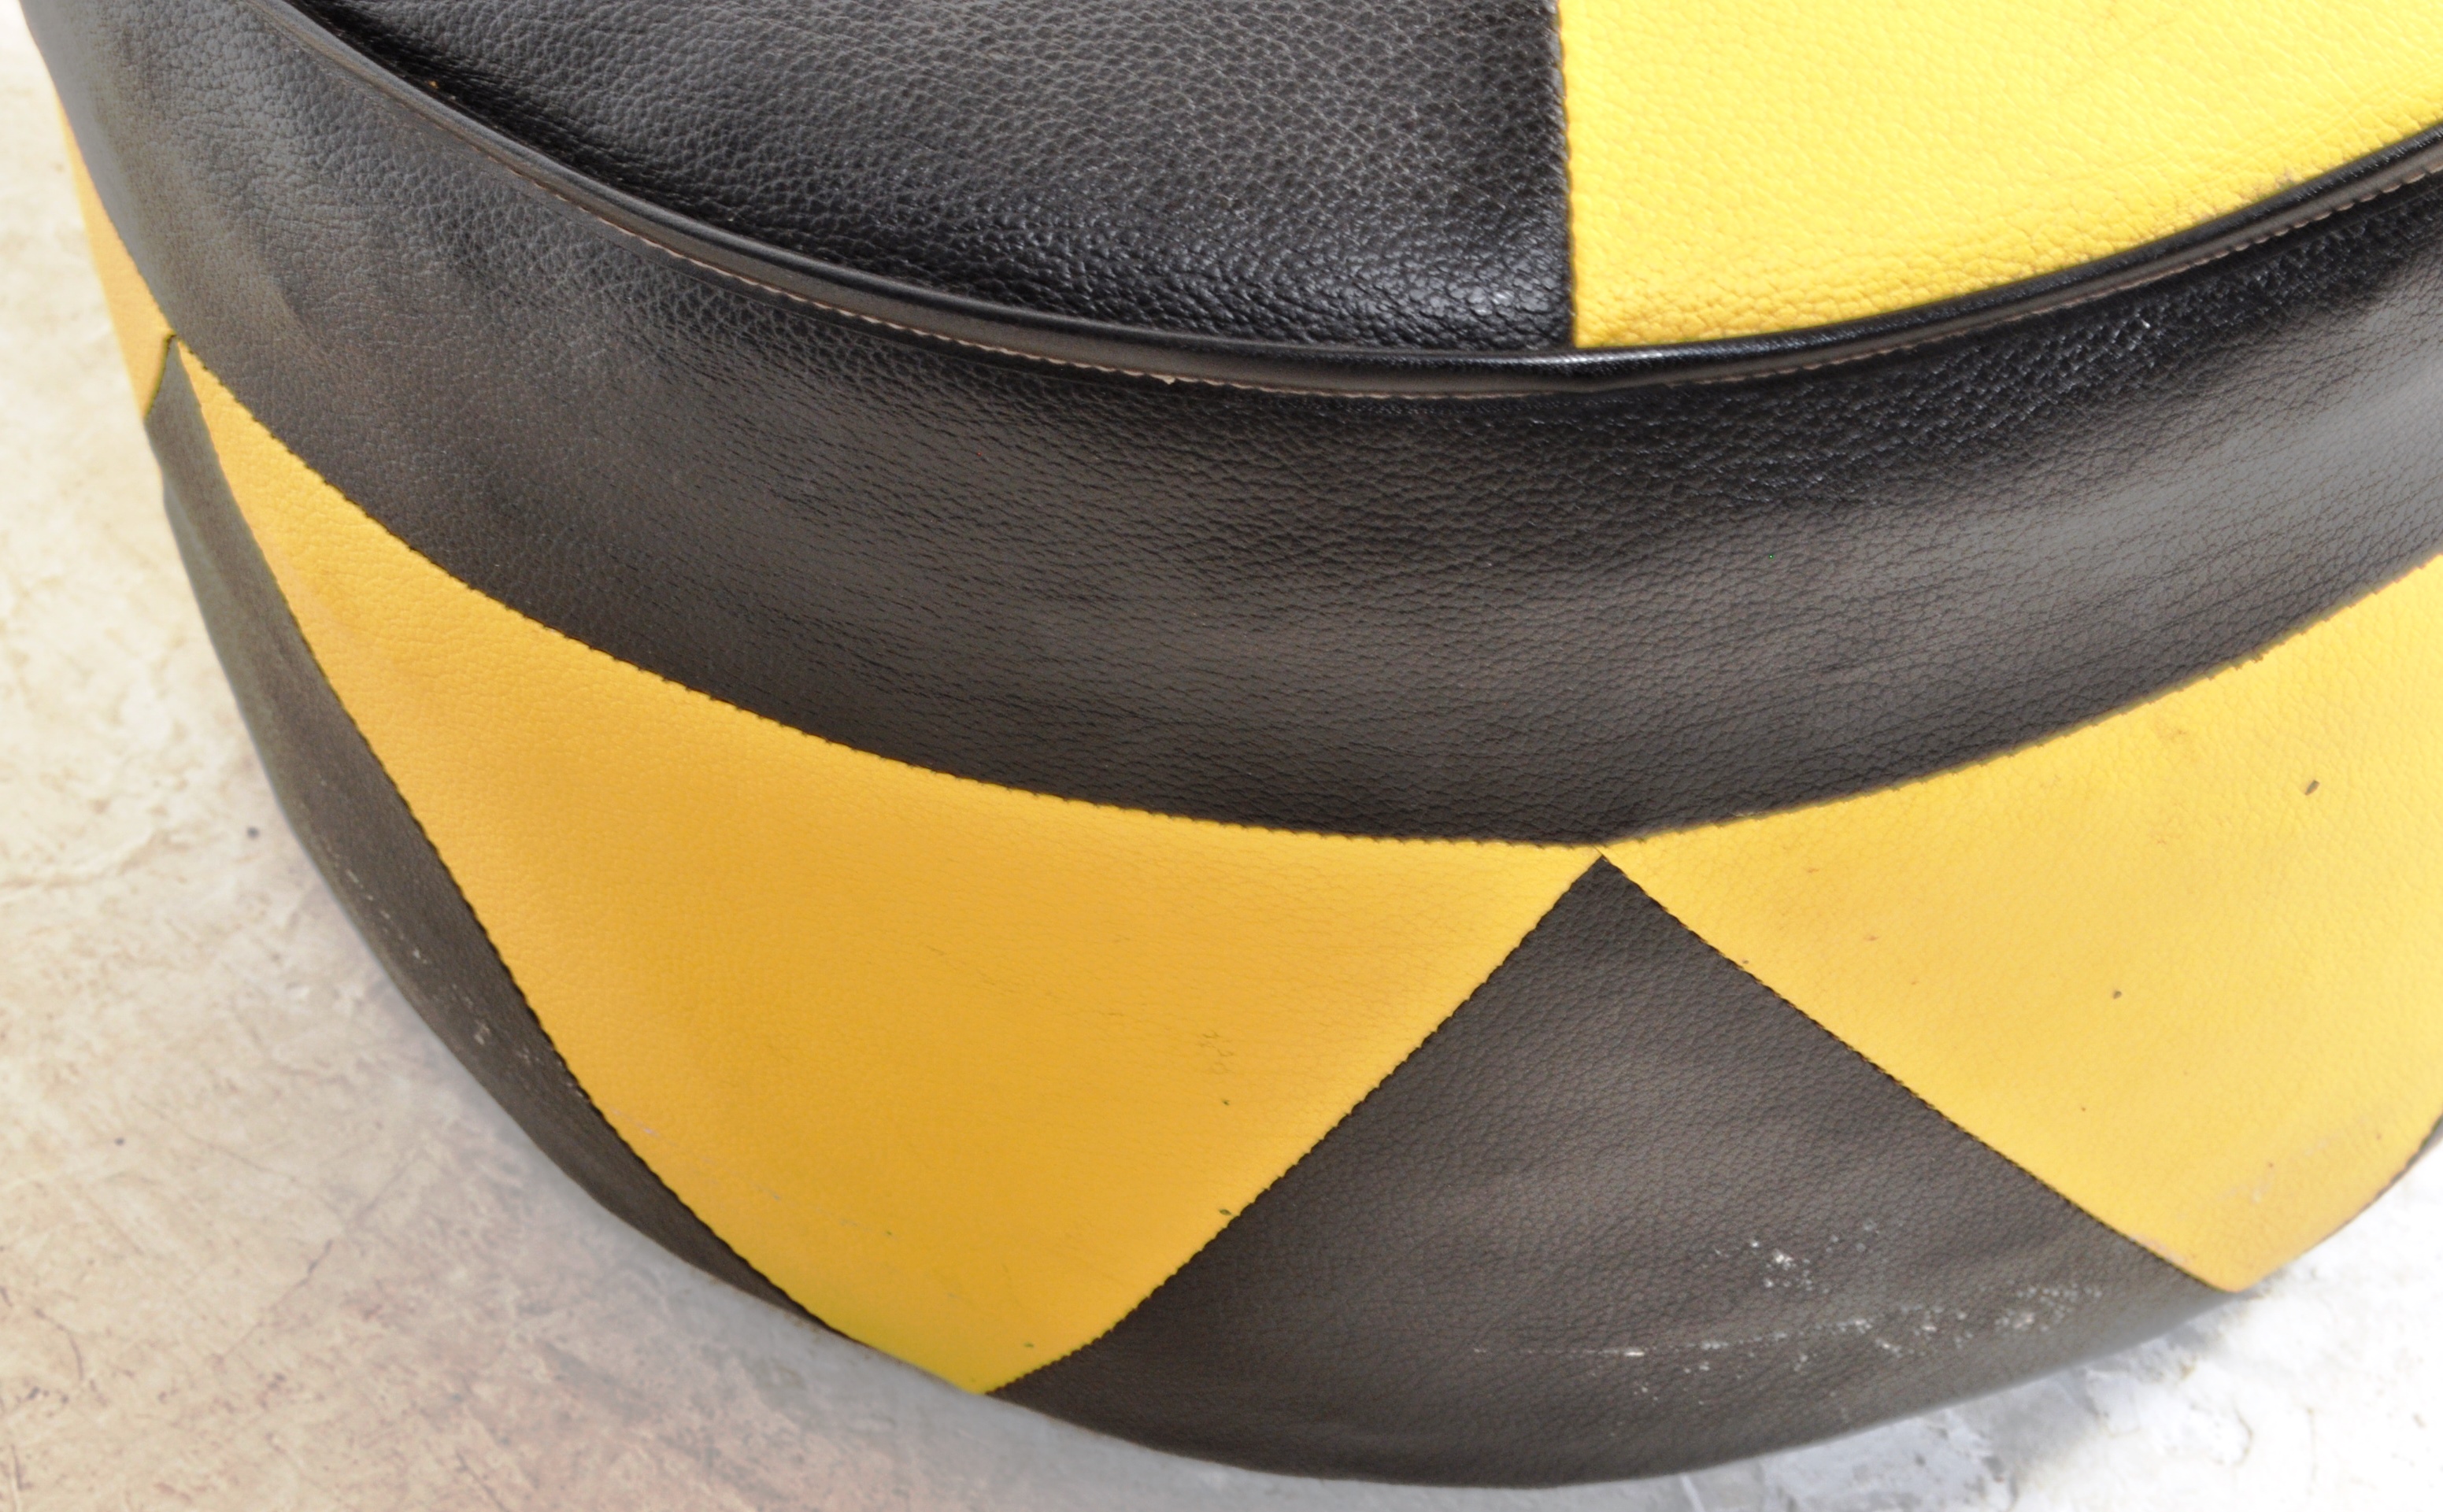 RETRO VINTAGE CIRCA 1970S BLACK AND YELLOW LEATHER FOOTSTOOL - Image 3 of 3